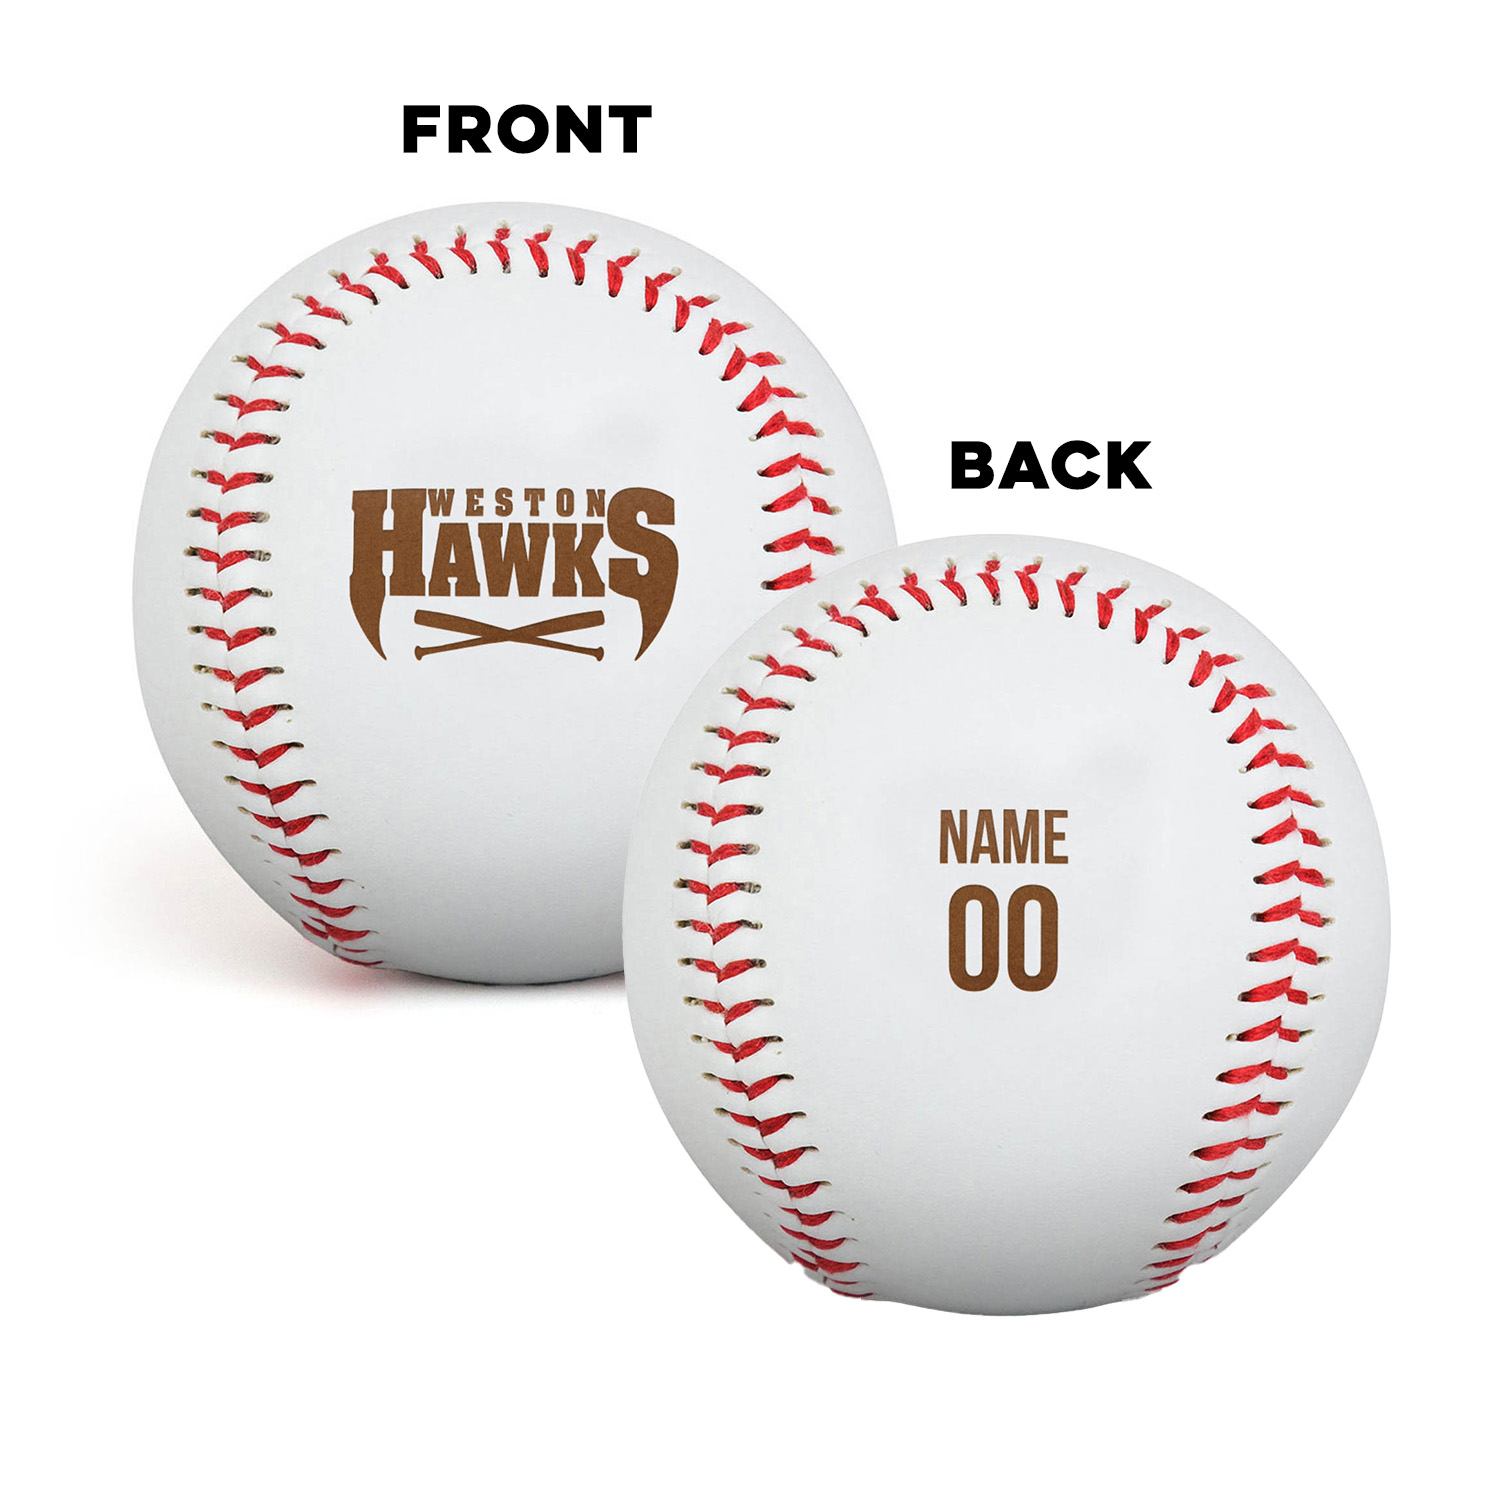 Engraved Baseball Front/Back - Player Information with Team Logo - Personalization Image